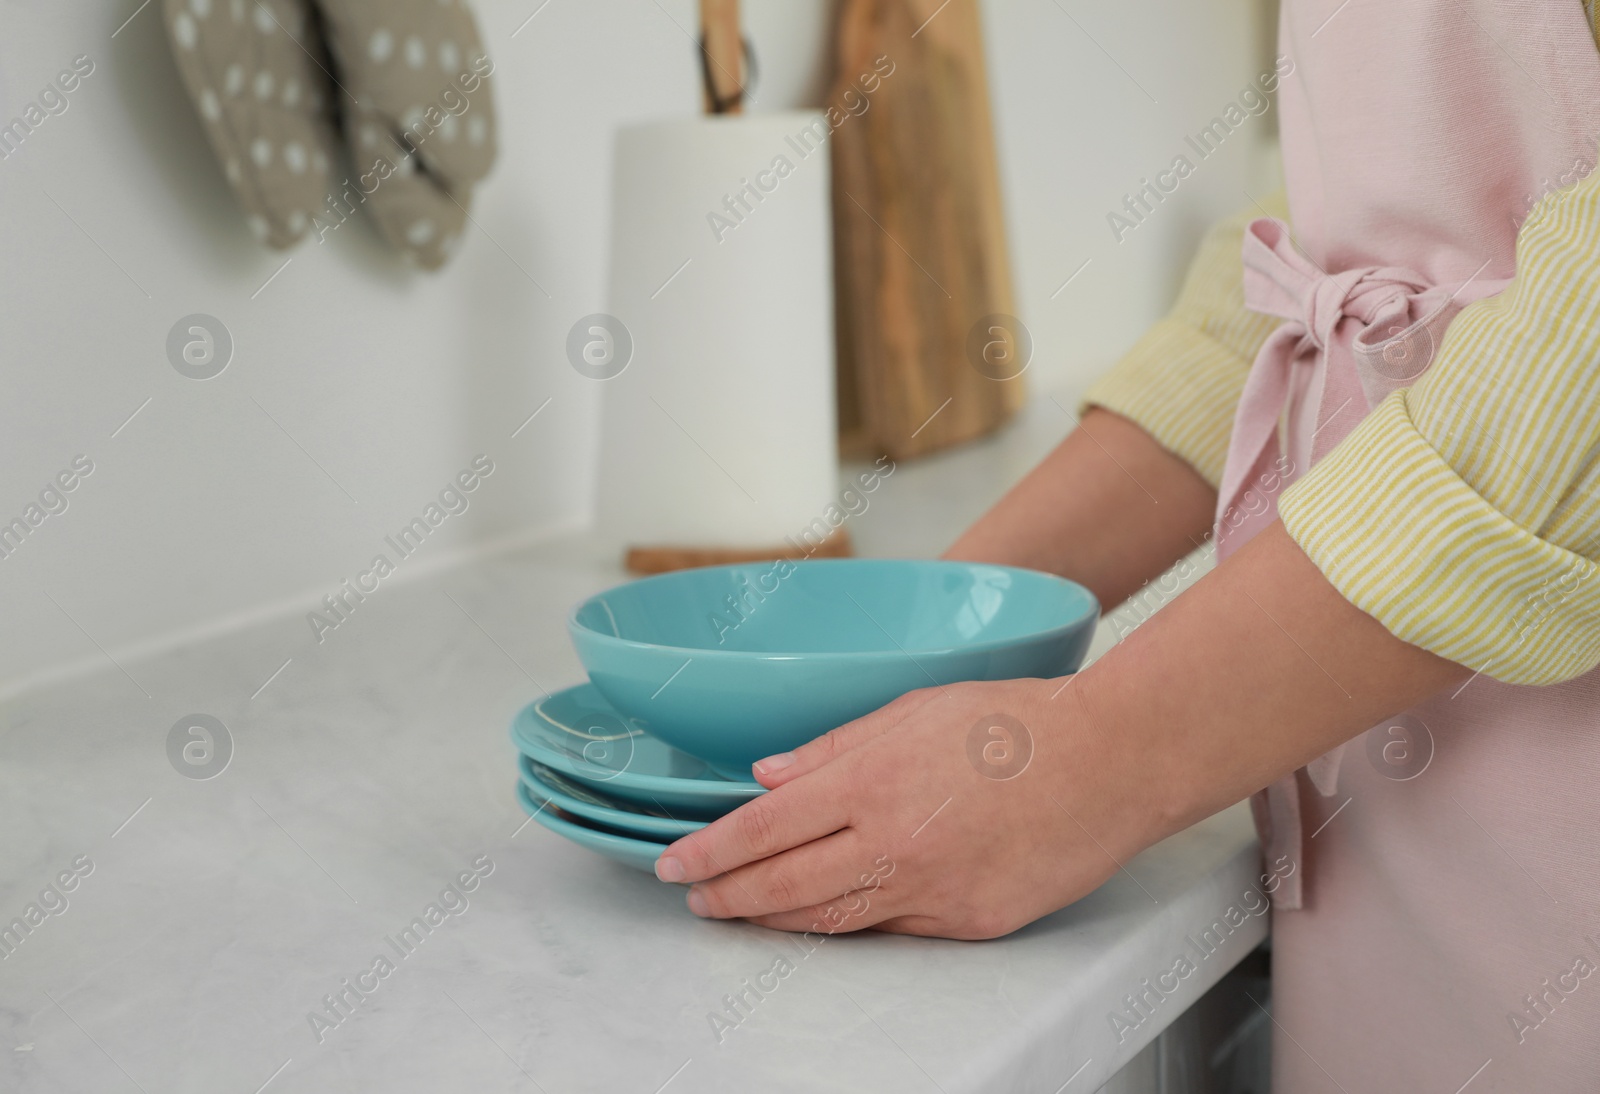 Photo of Woman putting plates on white marble countertop in kitchen, closeup view